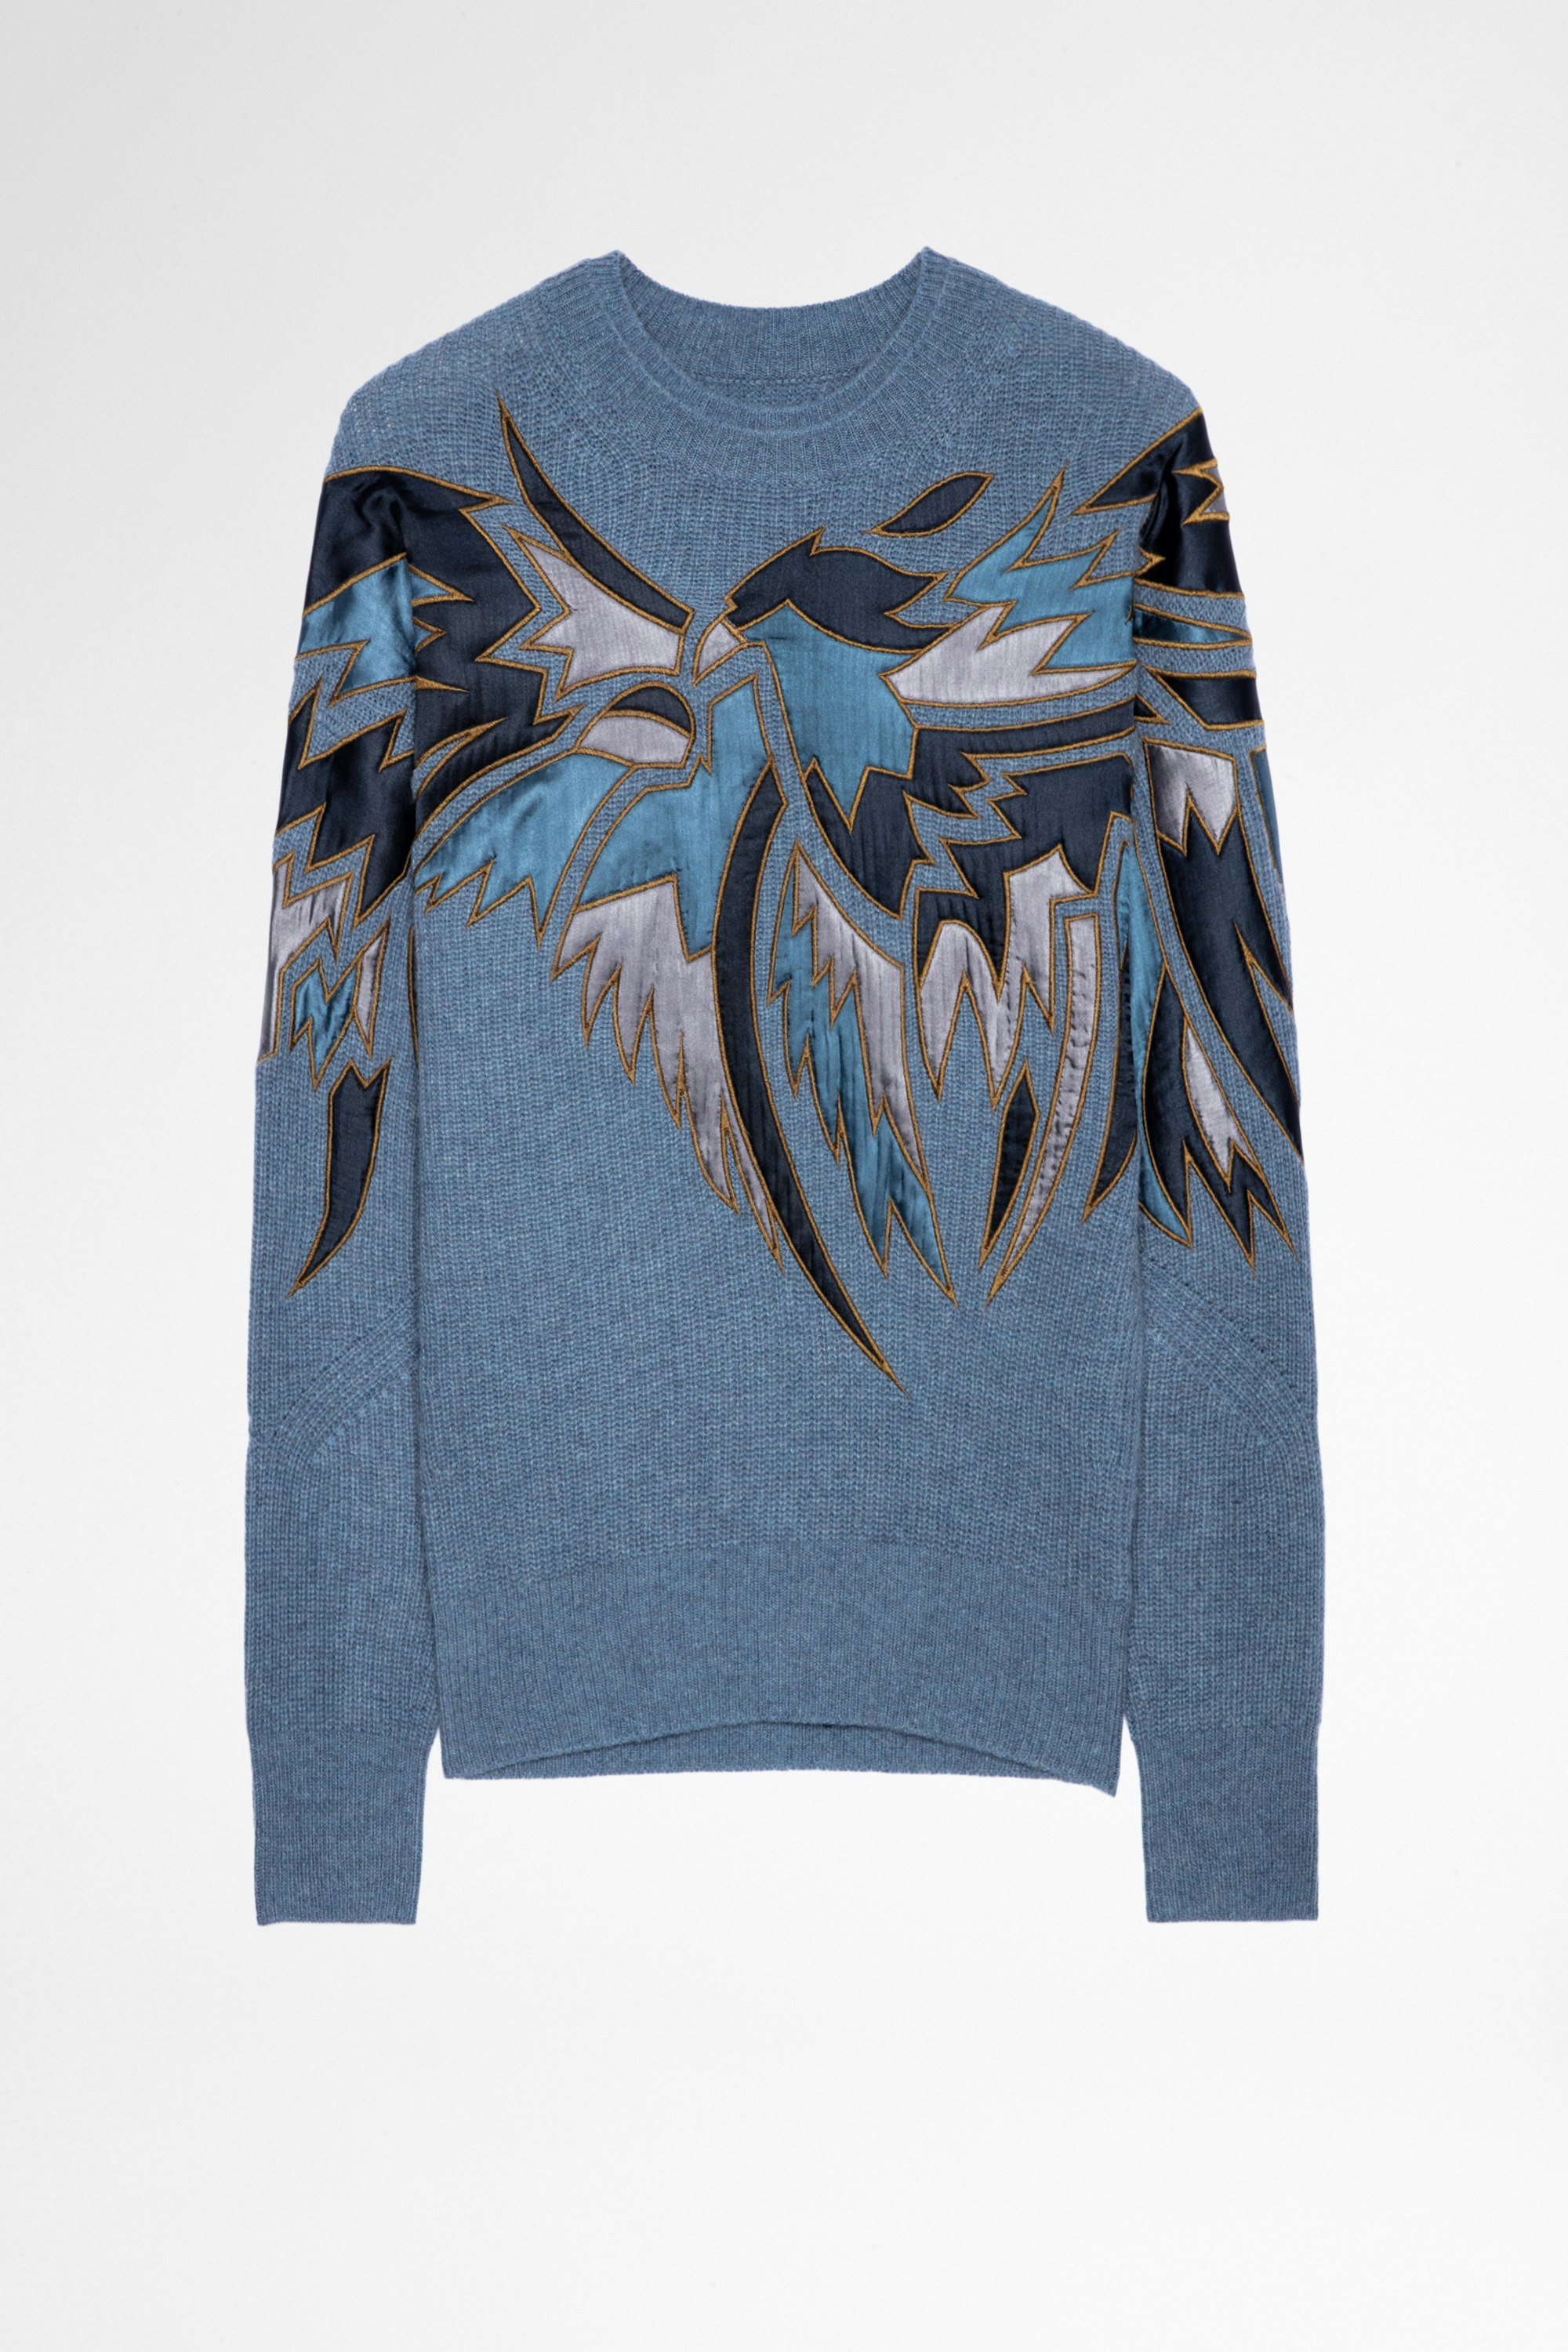 Kanson ニット カシミヤ Women's blue wool and cashmere jumper with eagle print